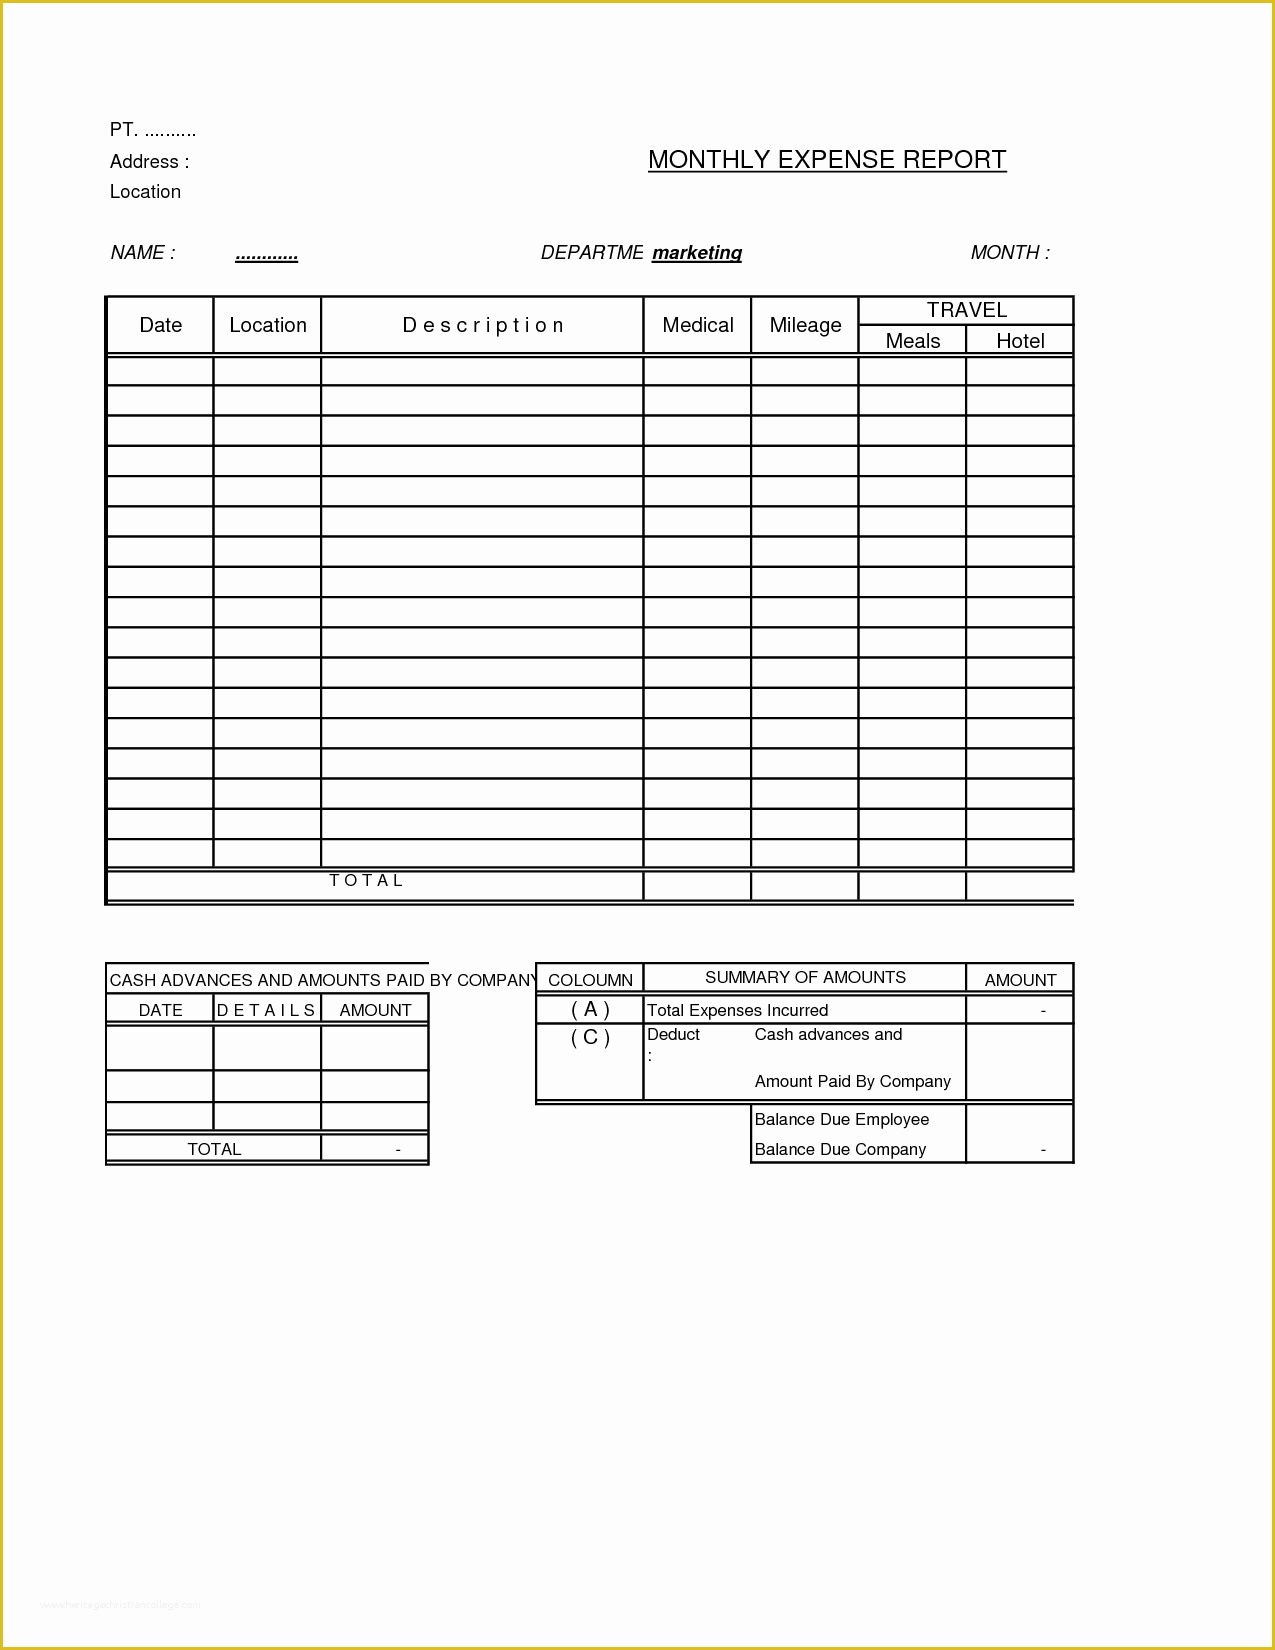 Free Expense Report Template Of Free Expense Report form Sample to Track Pany Expenses